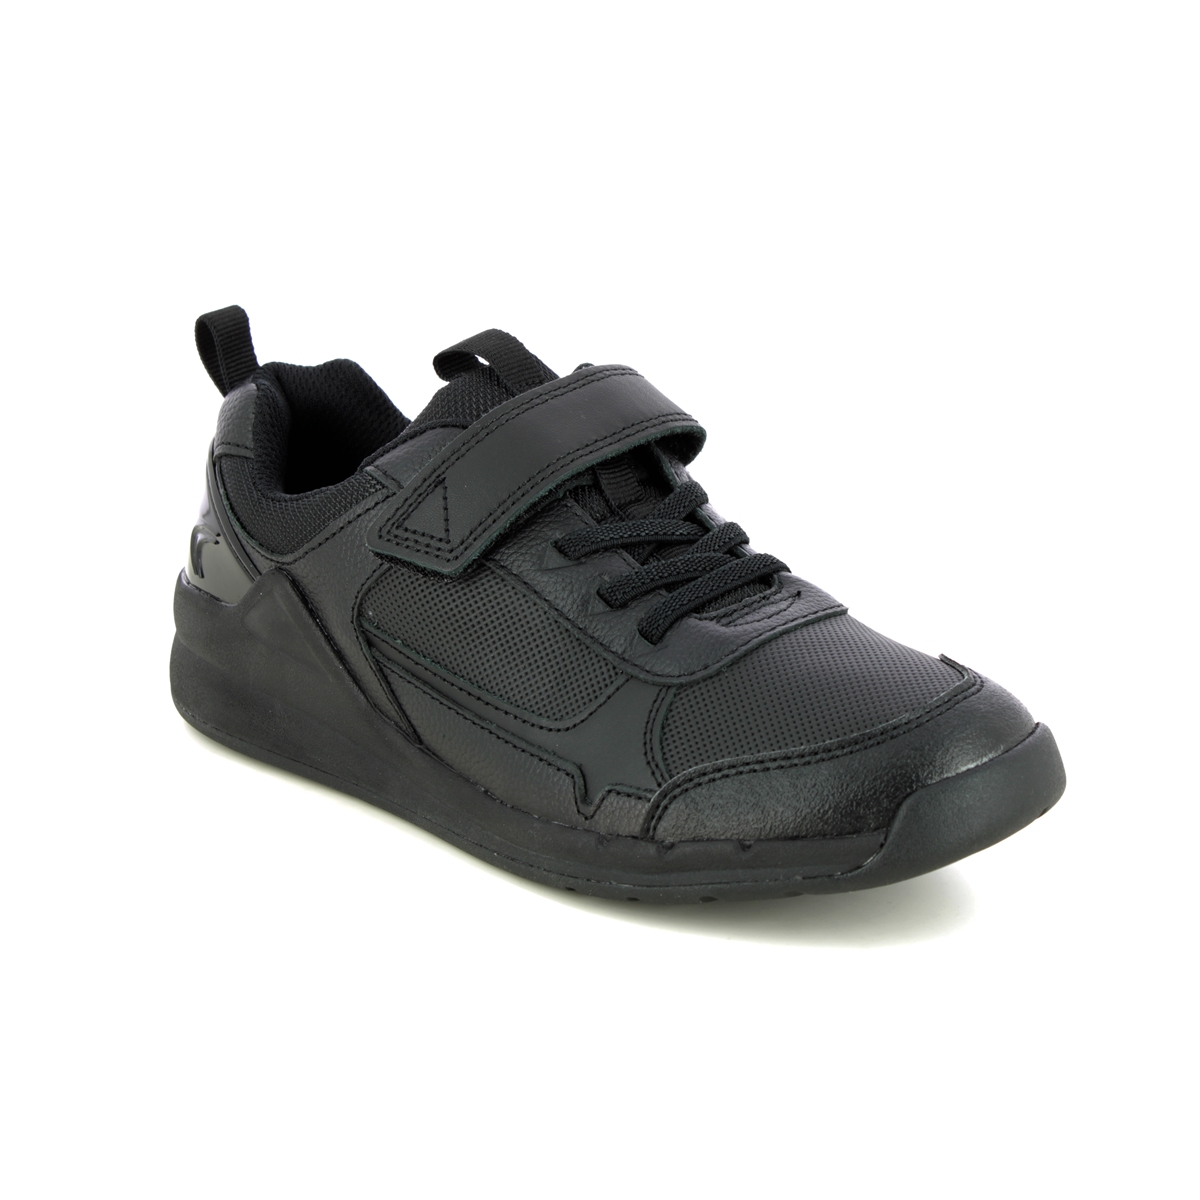 Clarks Orbit Sprint Y Black Leather Kids Boys Shoes 534746F In Size 5.5 In Plain Black Leather F Width Fitting Regular Fit For School For kids